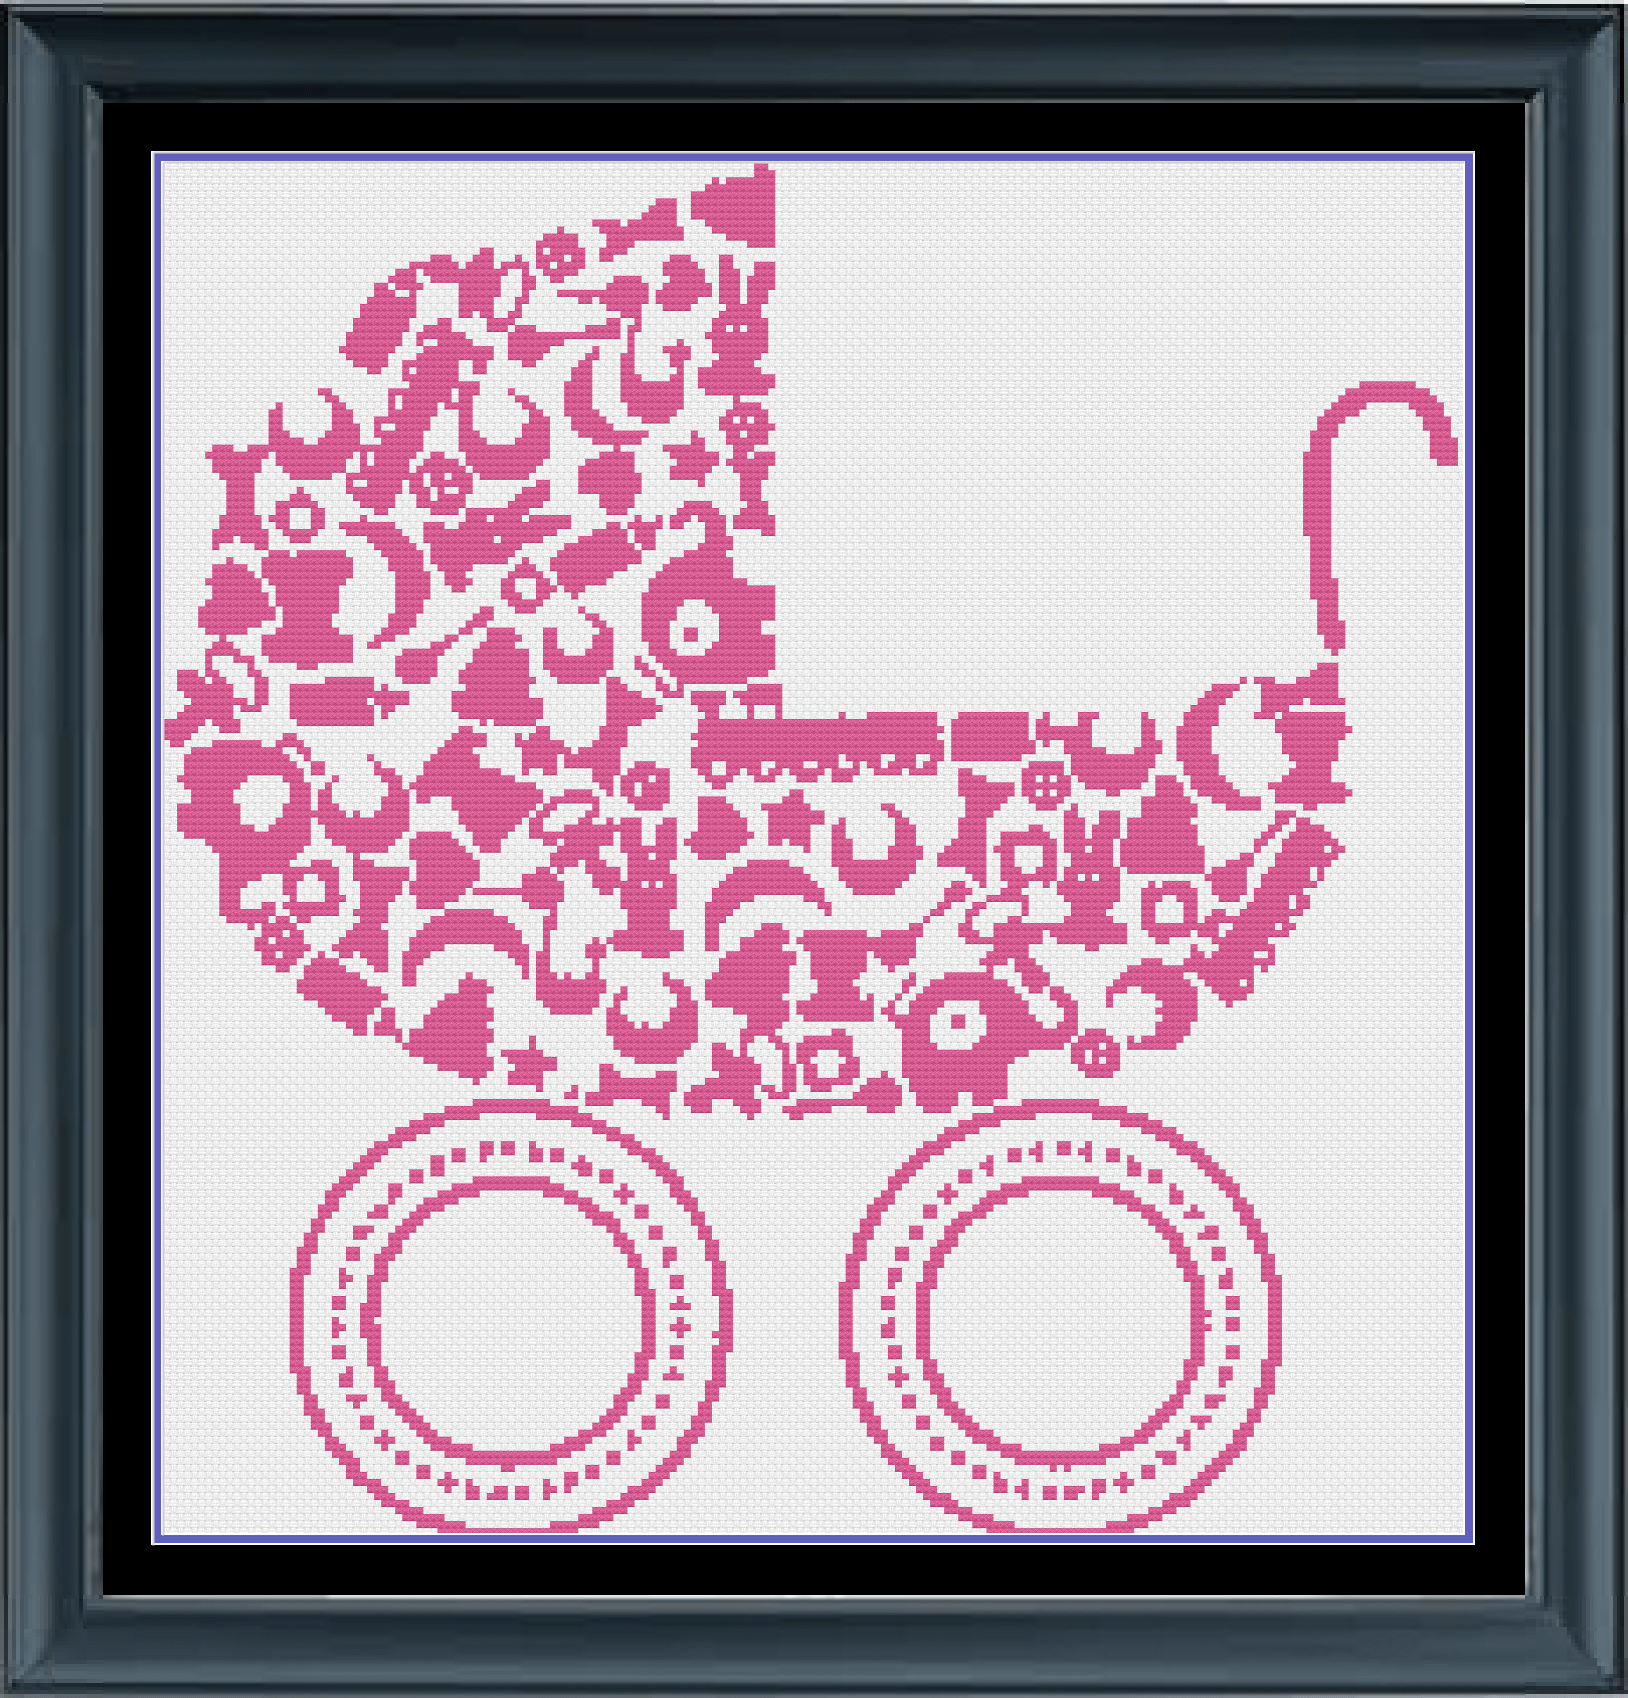 Stitching Jules Design Cross Stitch Pattern Baby Girl Carriage Daughter Monochrome Cross Stitch Needlepoint Embroidery Pattern - Instant Download - Pattern Keeper Ready